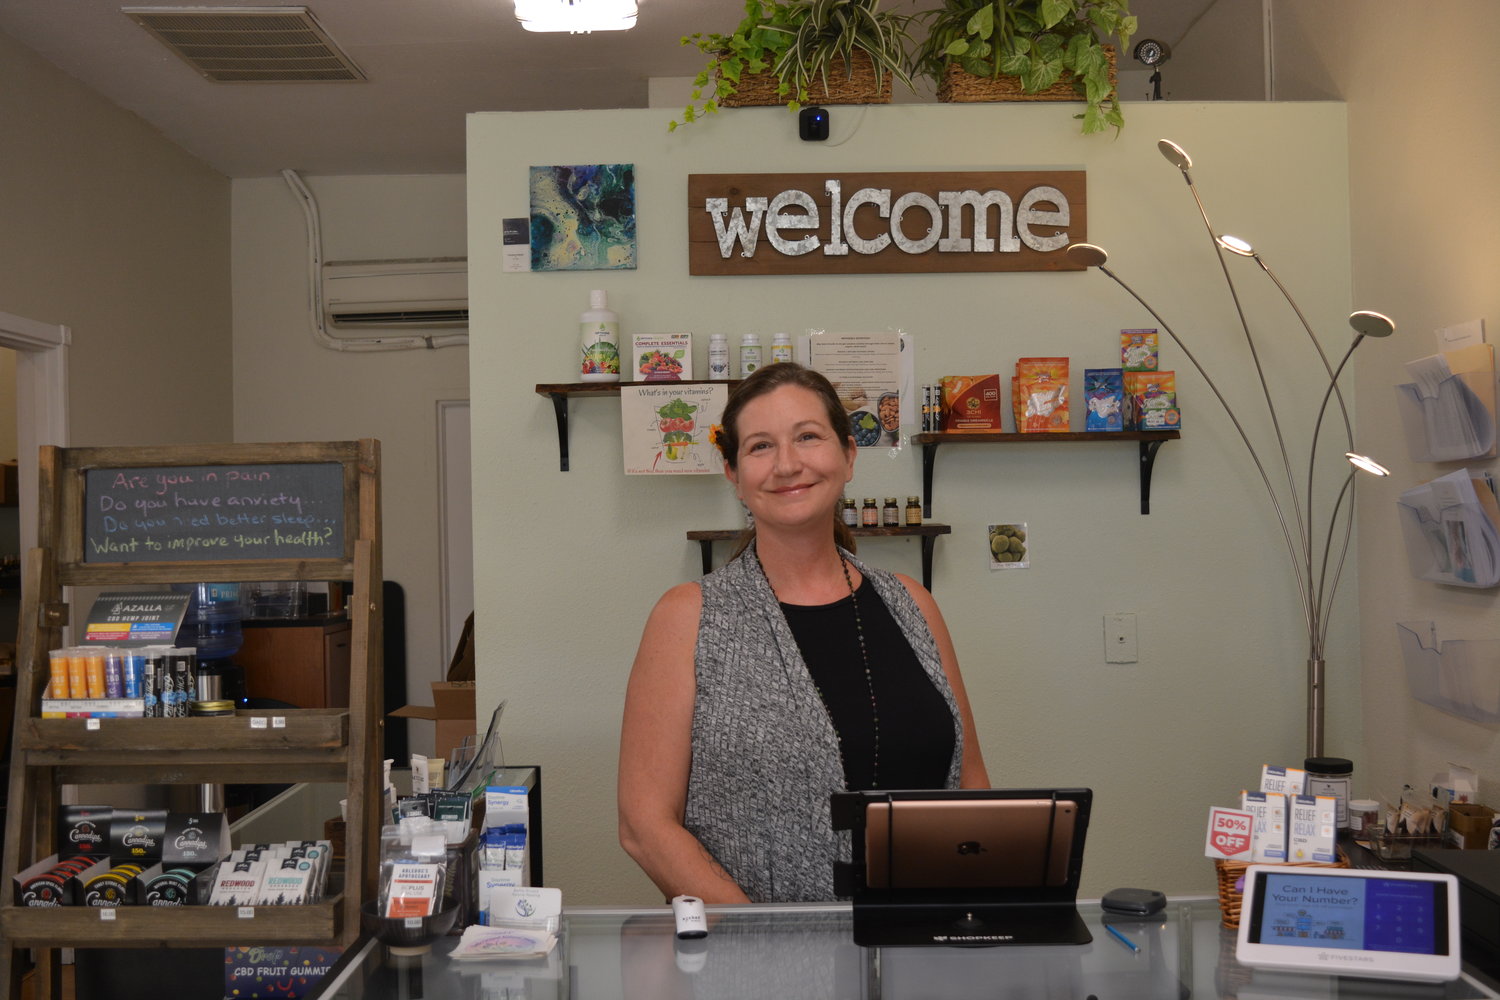 Christina Townsend stands behind the counter at Battle Ground Natural Healing on Aug. 16.